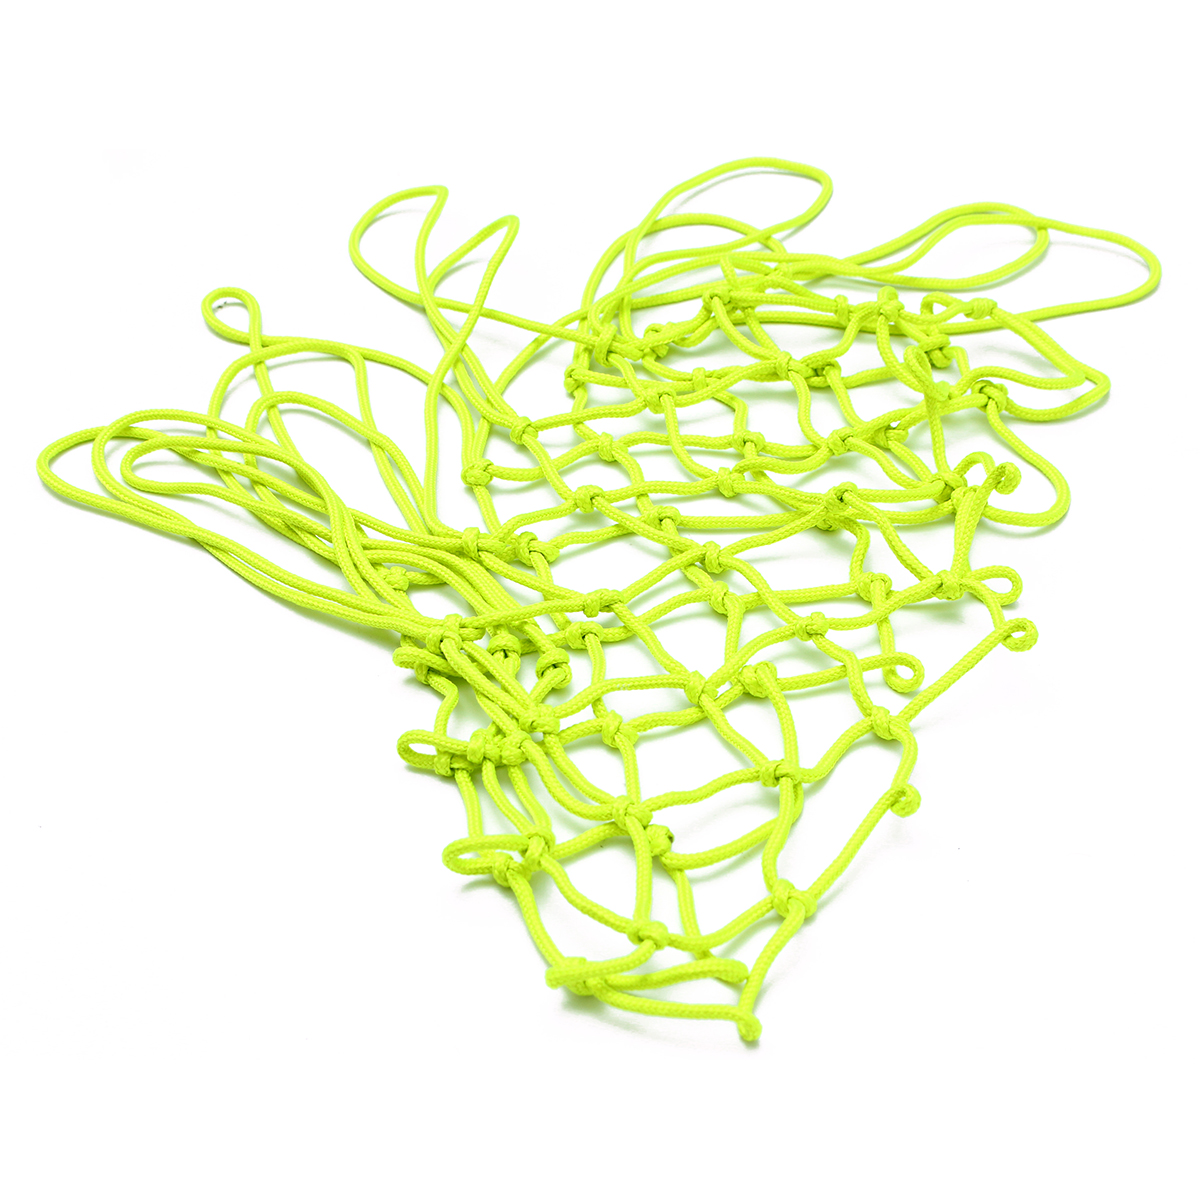 44x32cm-Glow-In-The-Dark-Basketball-Net-Nylon-Abrasion-Resistant-Easy-to-Install-Outdoor-Indoor-Bask-1884146-6